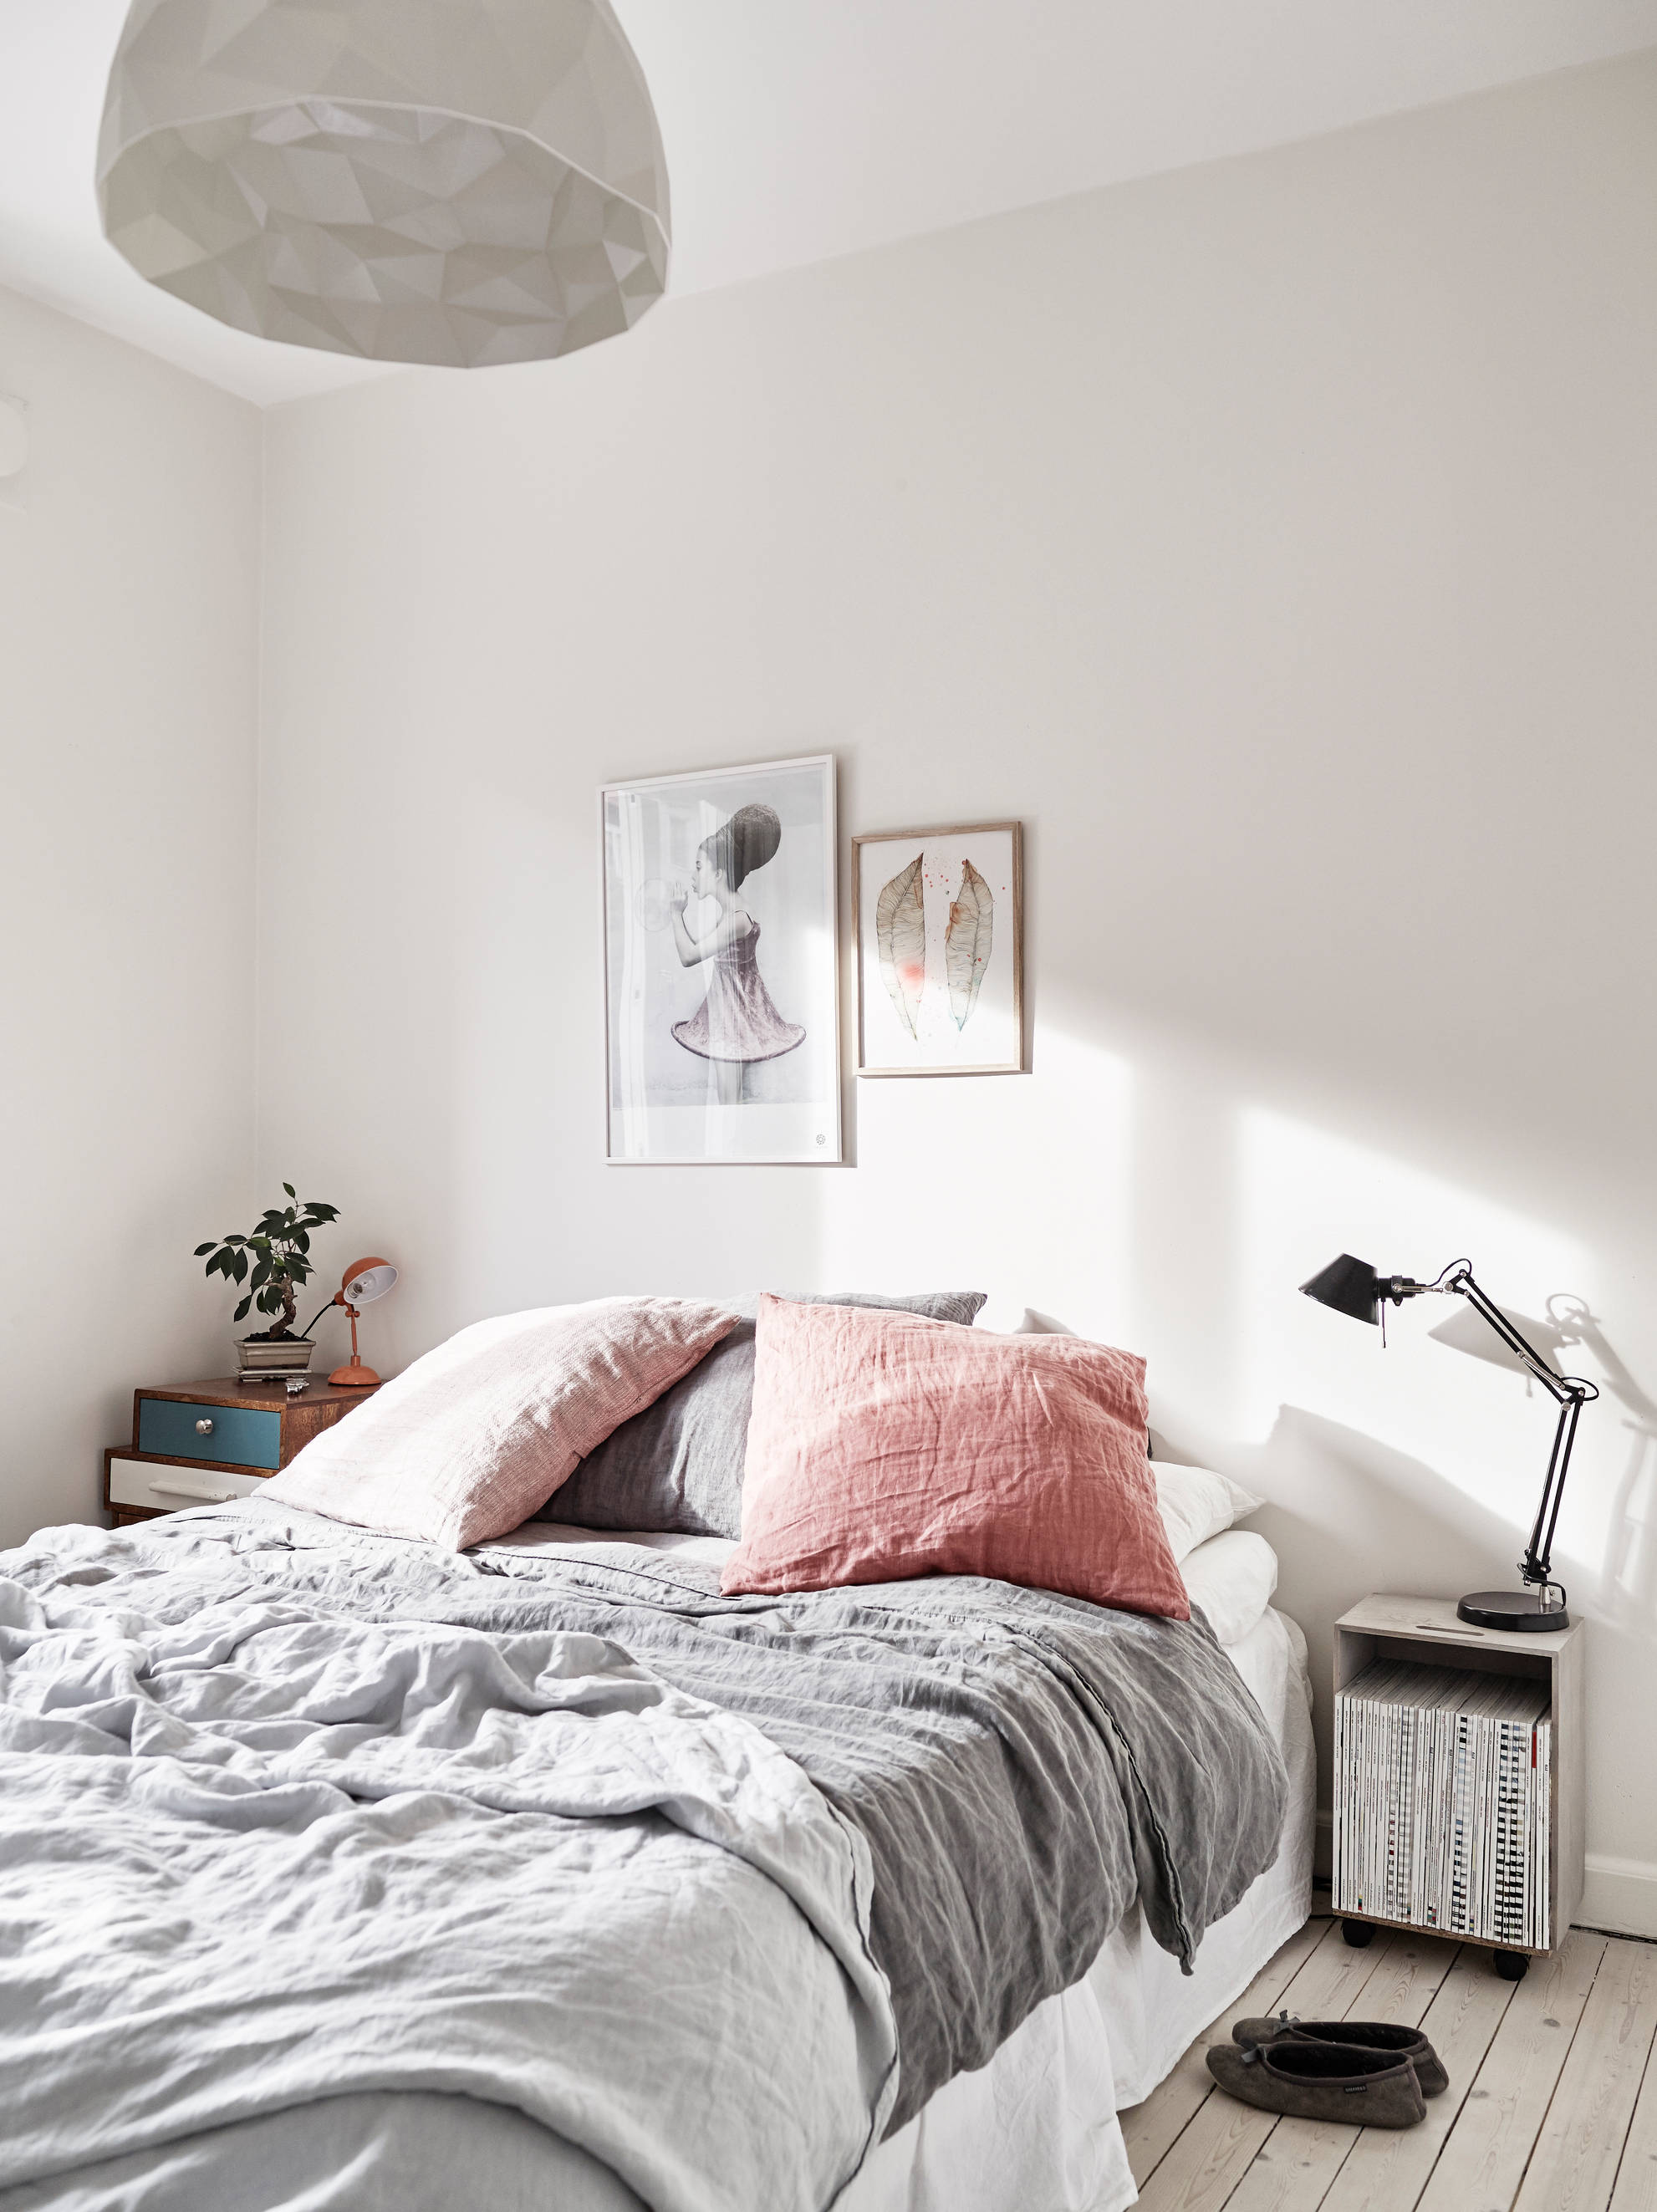 Dreamy bedroom and vintage elements - via cocolapinedesign.com